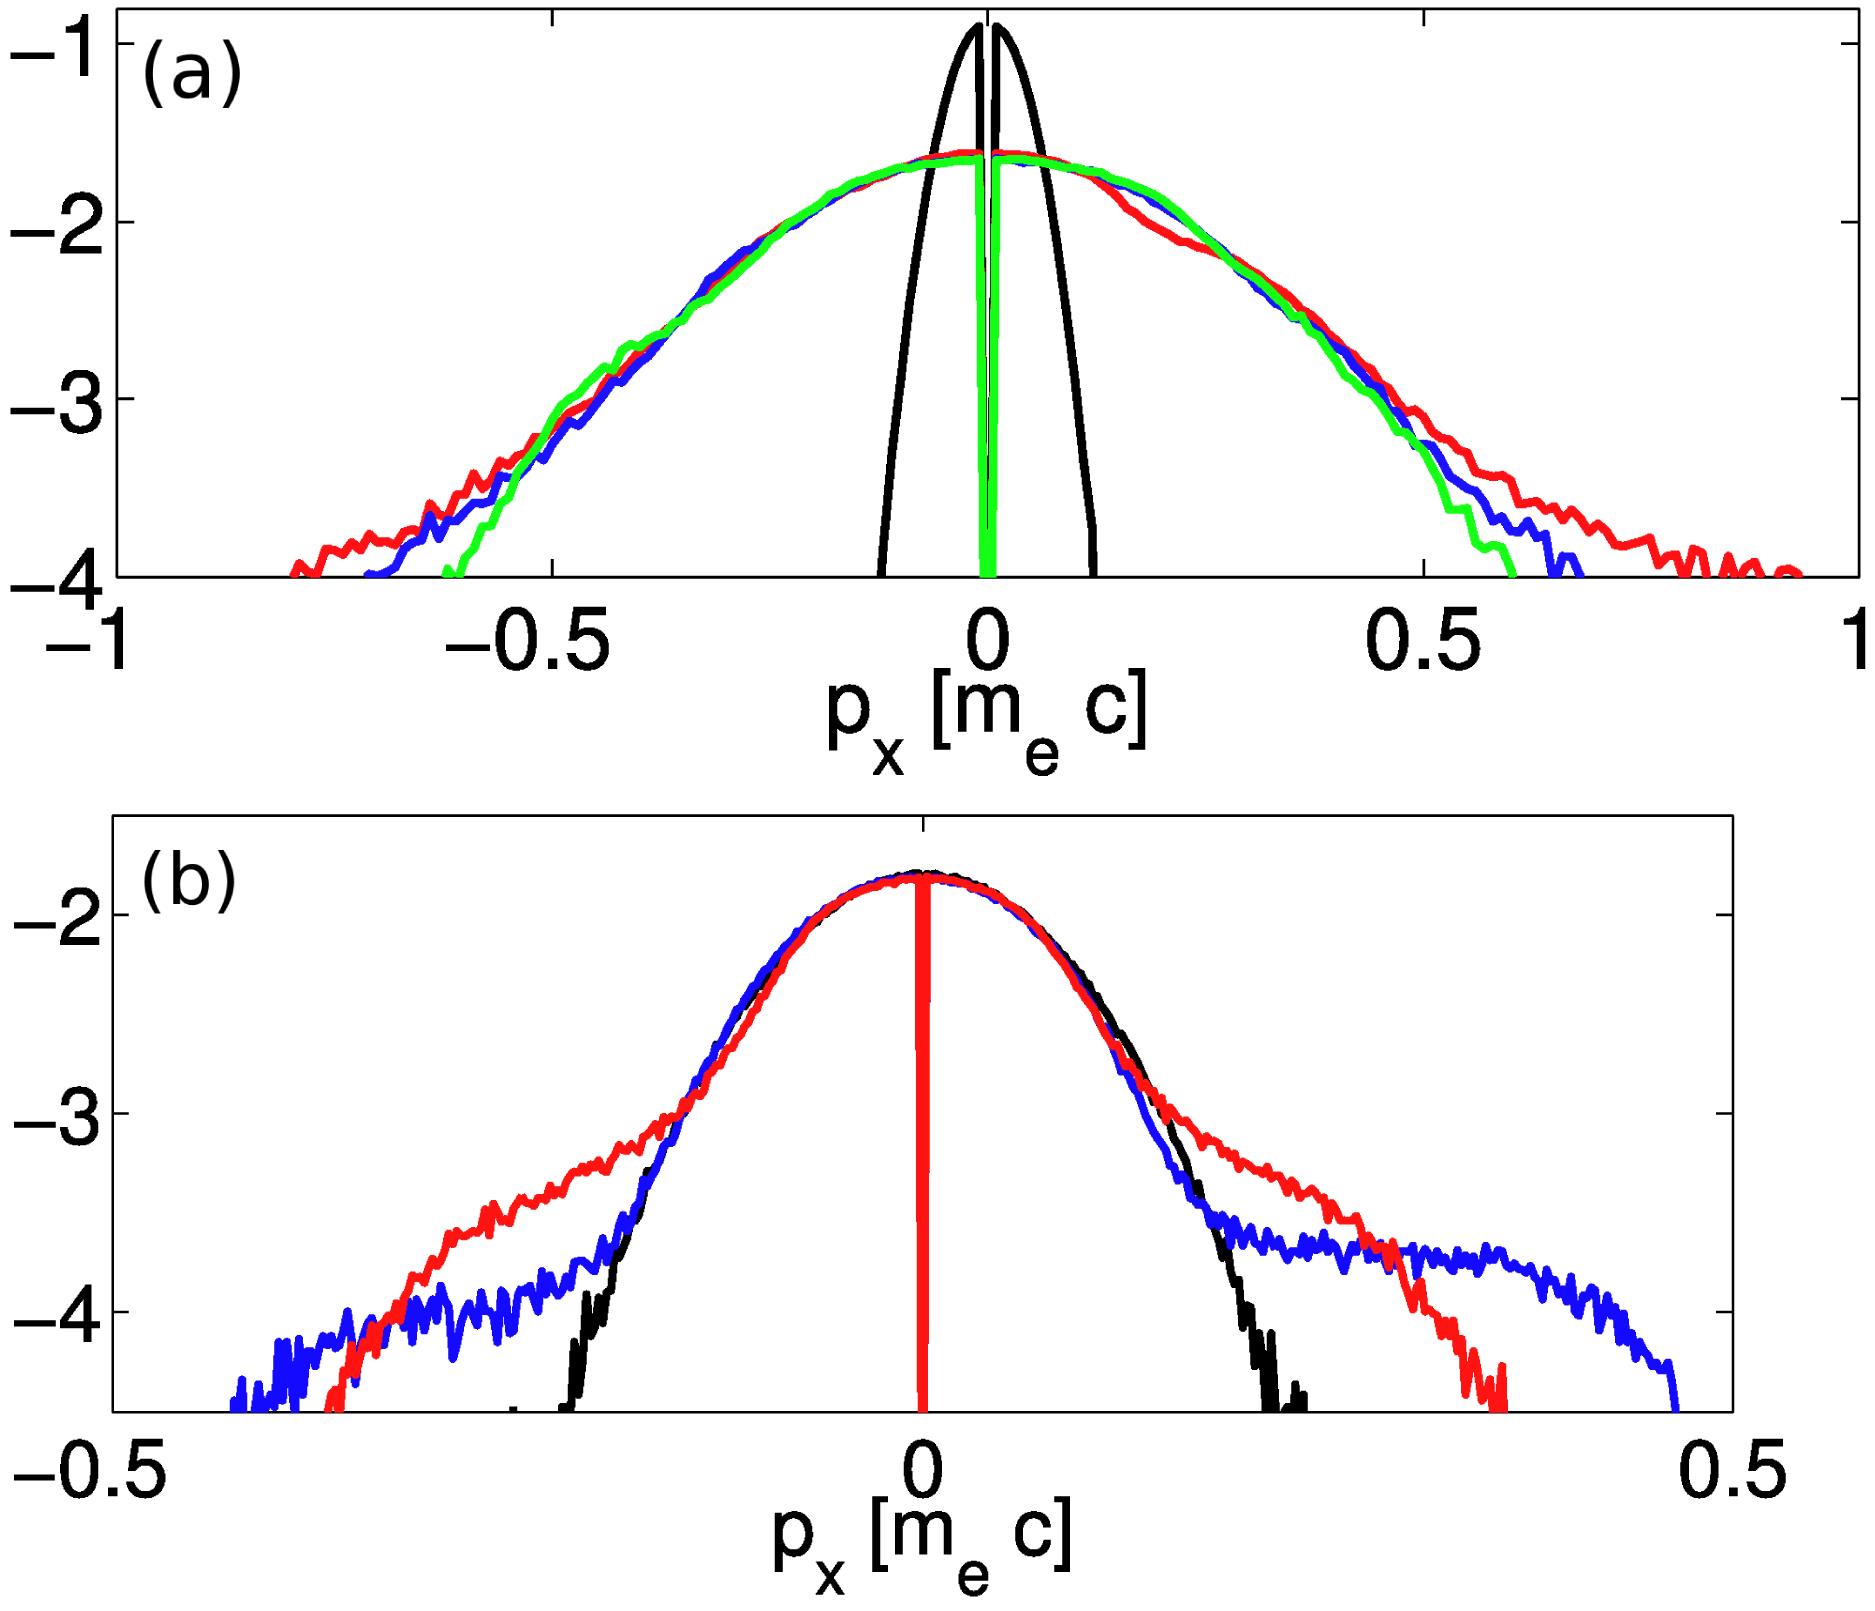 Parallel electron distribution functions. (a) Case IV for the times: $t=0$ (black), $(0.5\times 10^{4}){\it\omega}_{o}^{-1}$ (red), $(1.1\times 10^{4}){\it\omega}_{o}^{-1}$ (blue) and $(2\times 10^{4}){\it\omega}_{o}^{-1}$ (green). (b) Case VII for the times: $t=0$ (black), $(0.5\times 10^{4}){\it\omega}_{o}^{-1}$ (blue) and $(1\times 10^{4}){\it\omega}_{o}^{-1}$ (red).